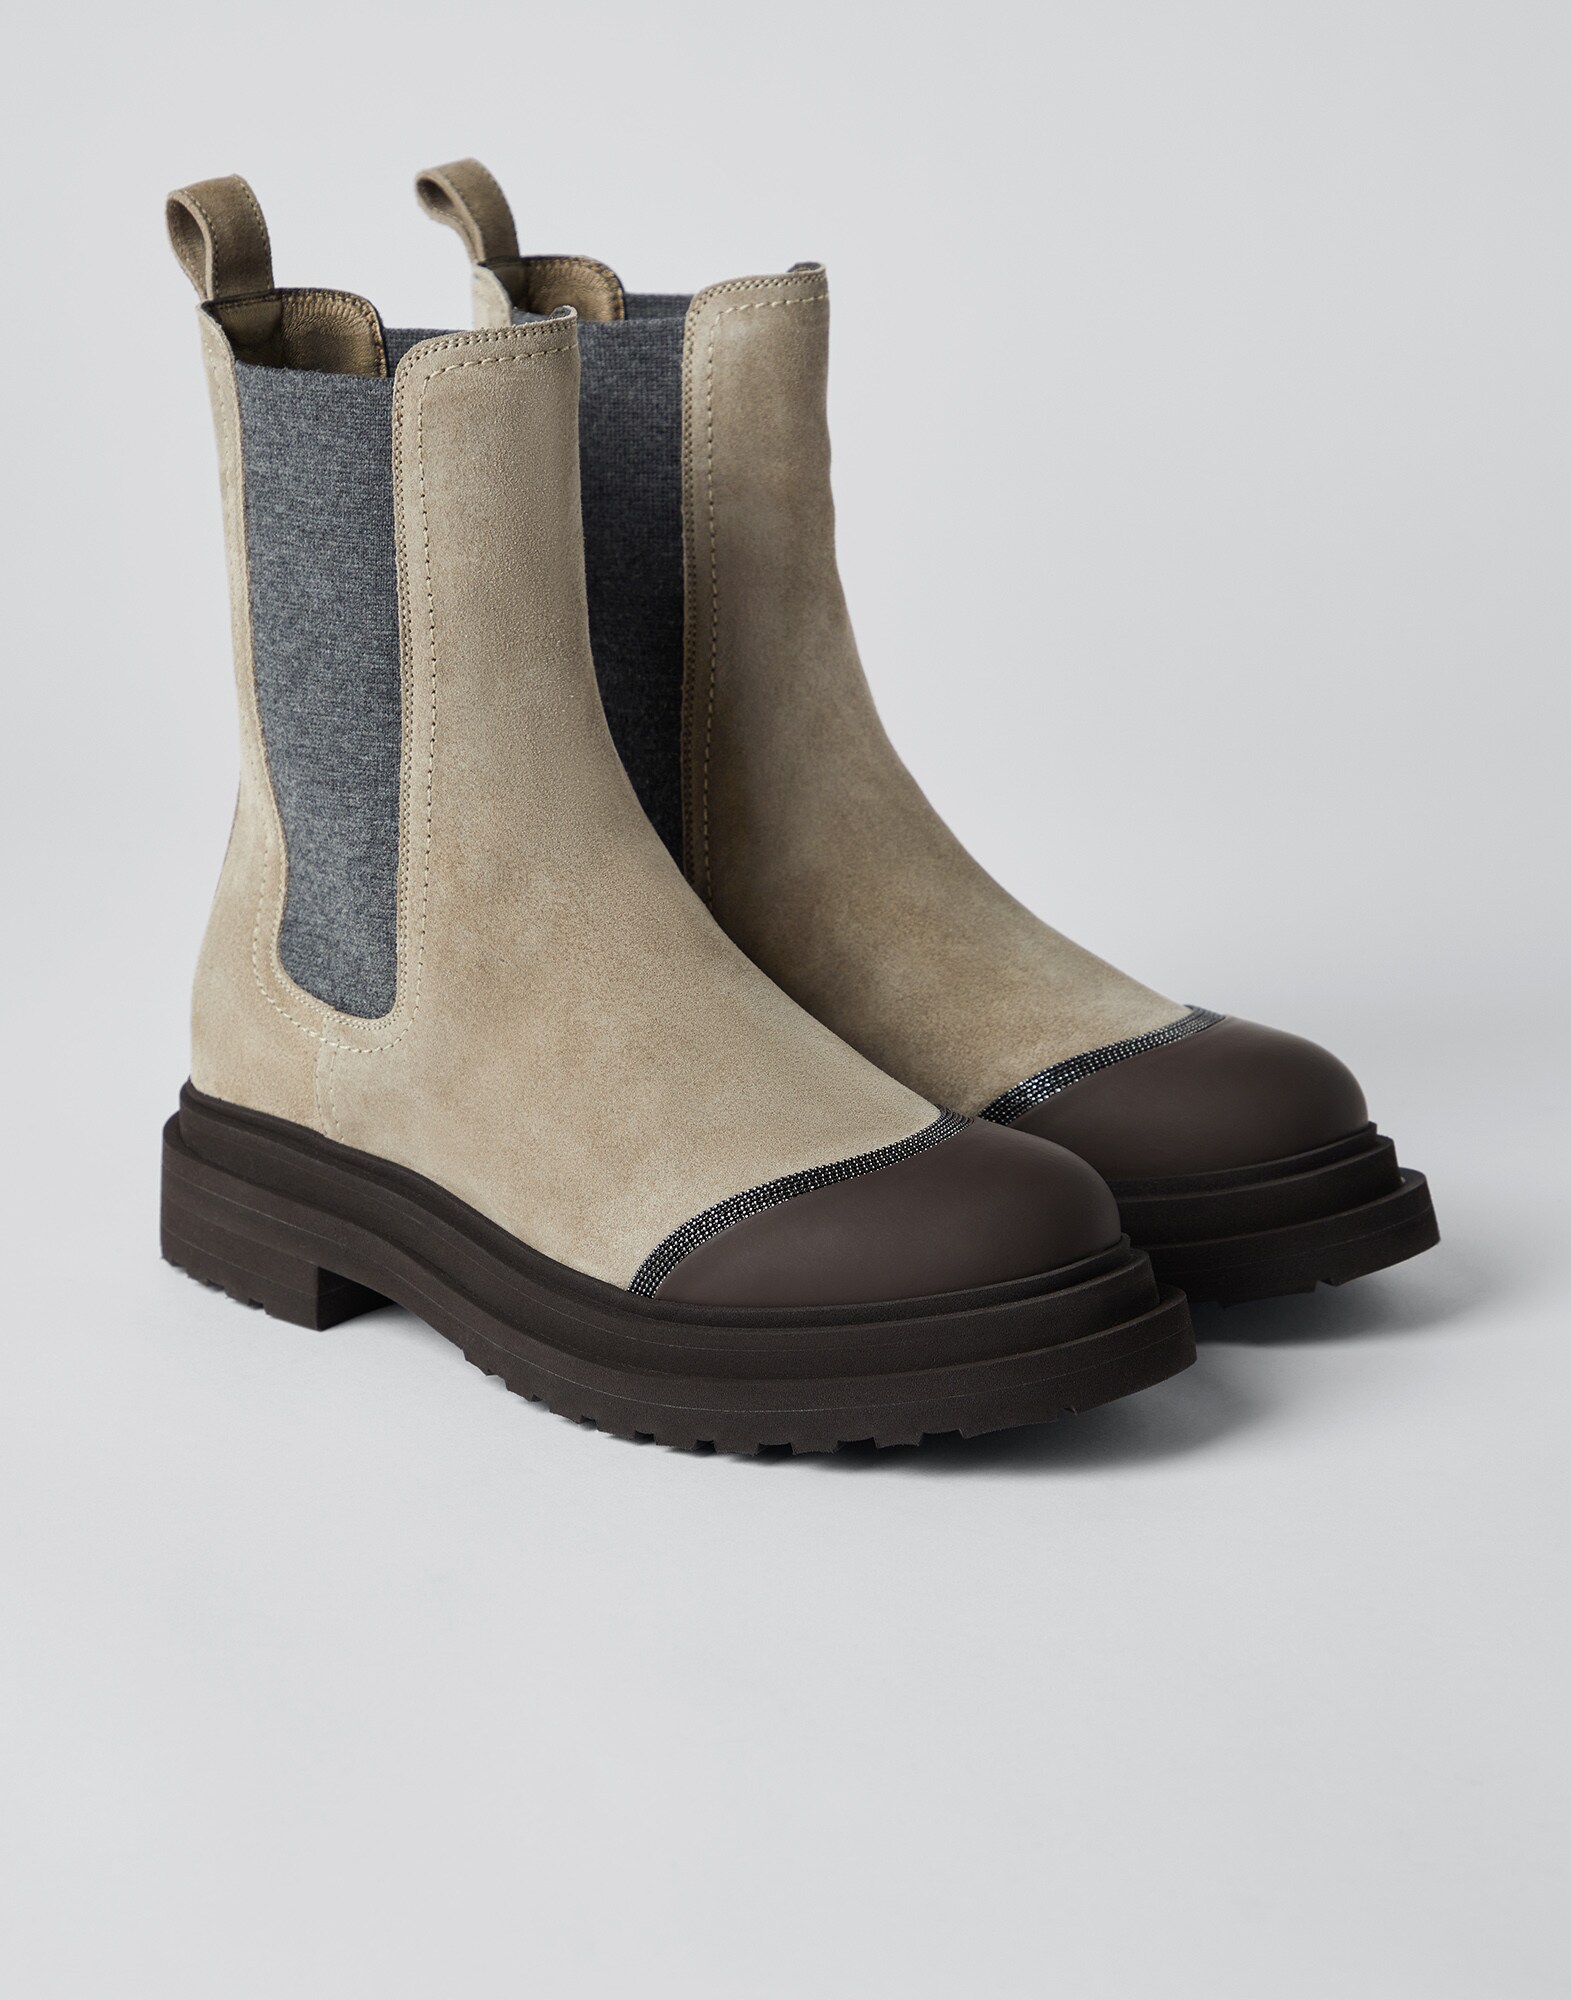 Chelsea boots with monili